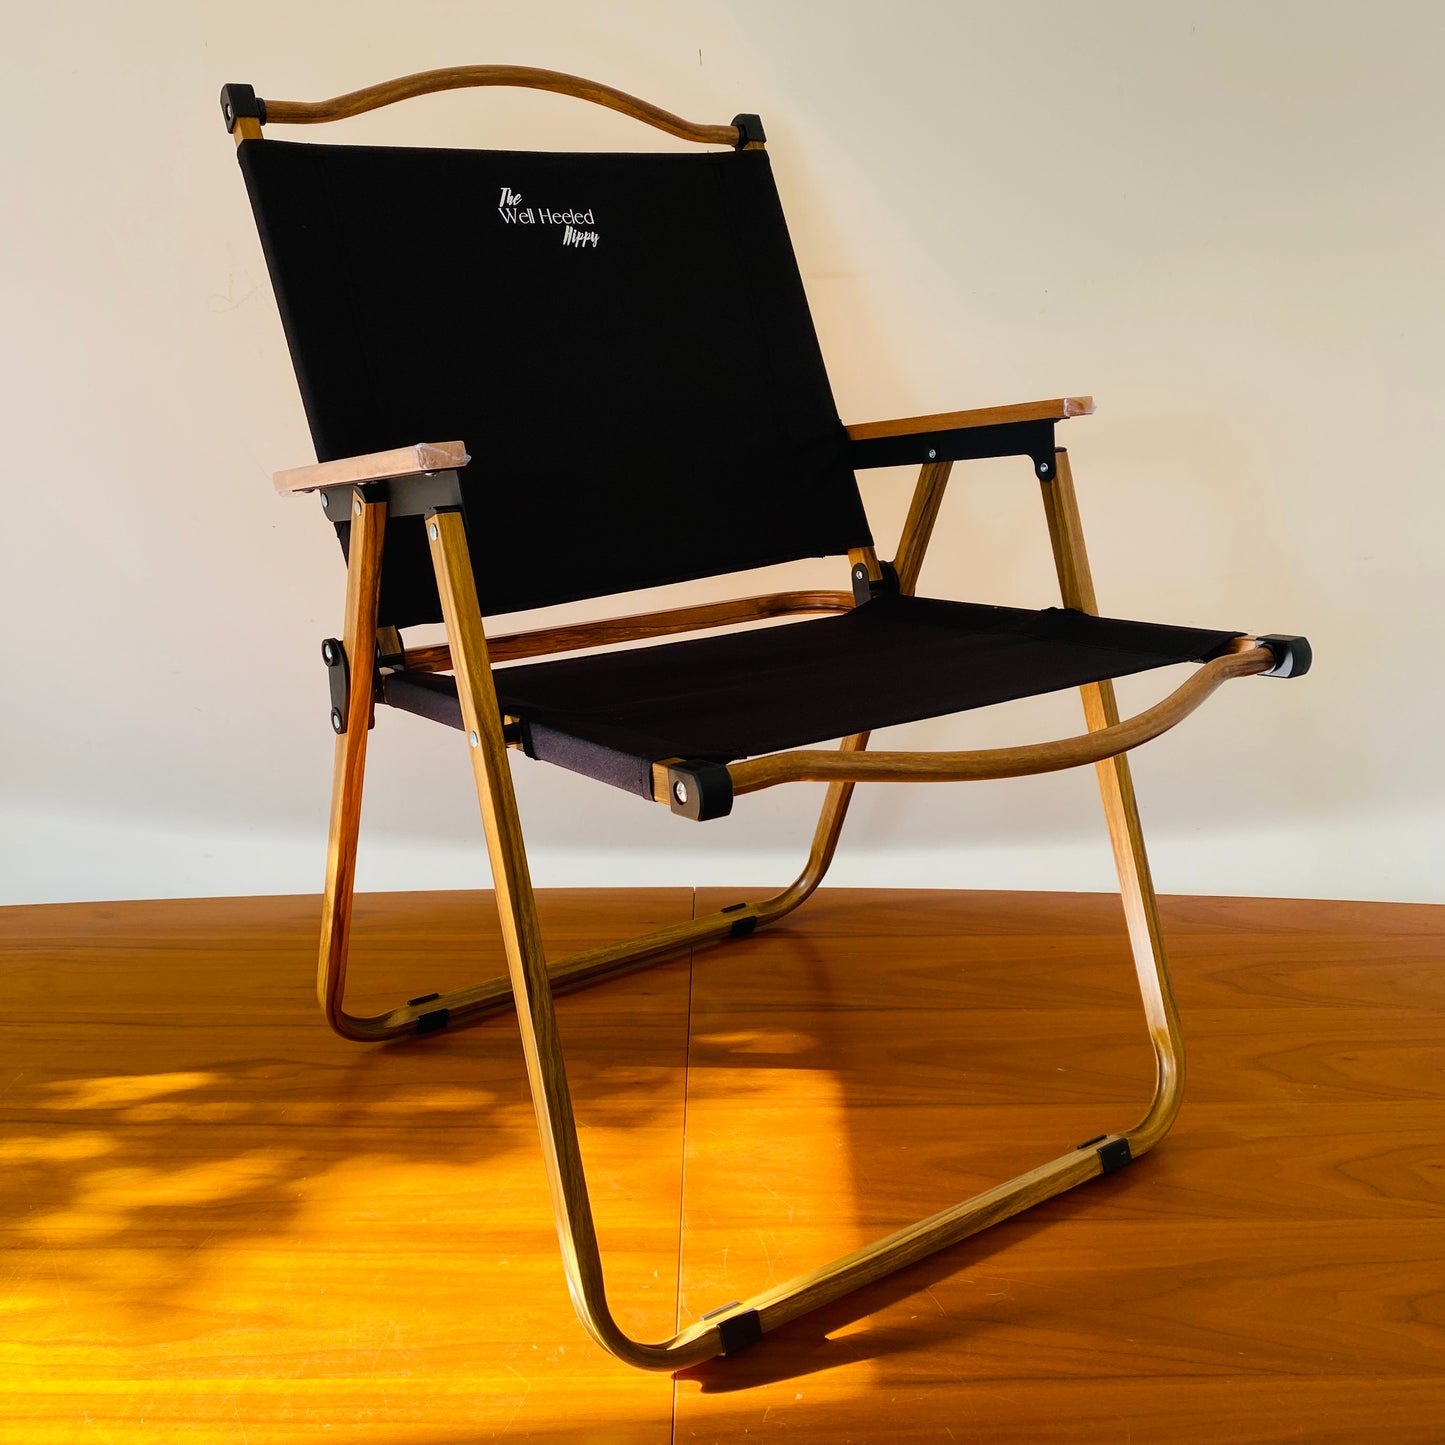 A side-view of the black, foldable, portable, luxury safari chair by The Well Heeled Hippy Store